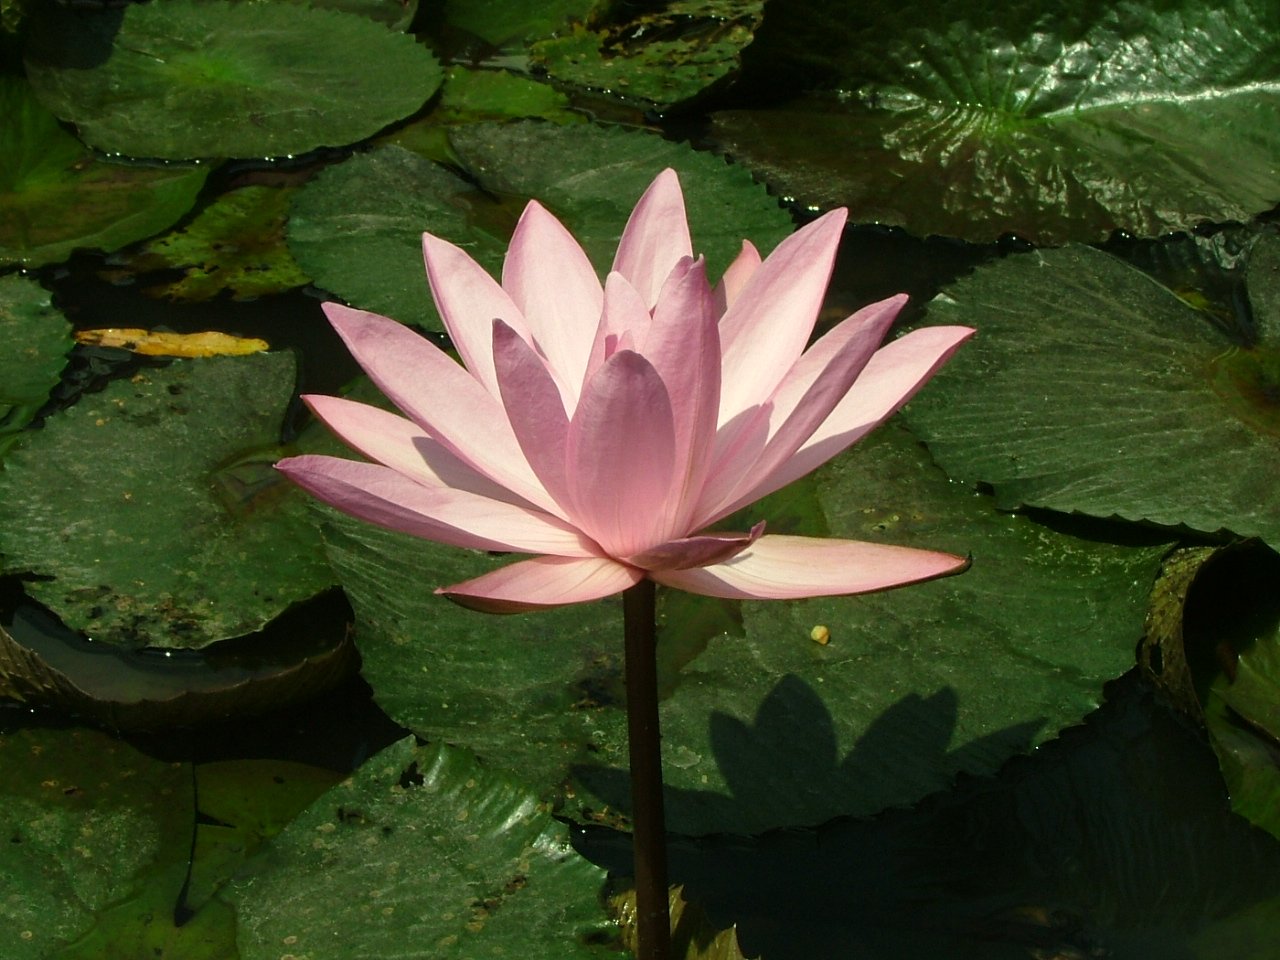 a pink lotus flower in the middle of some water lilies